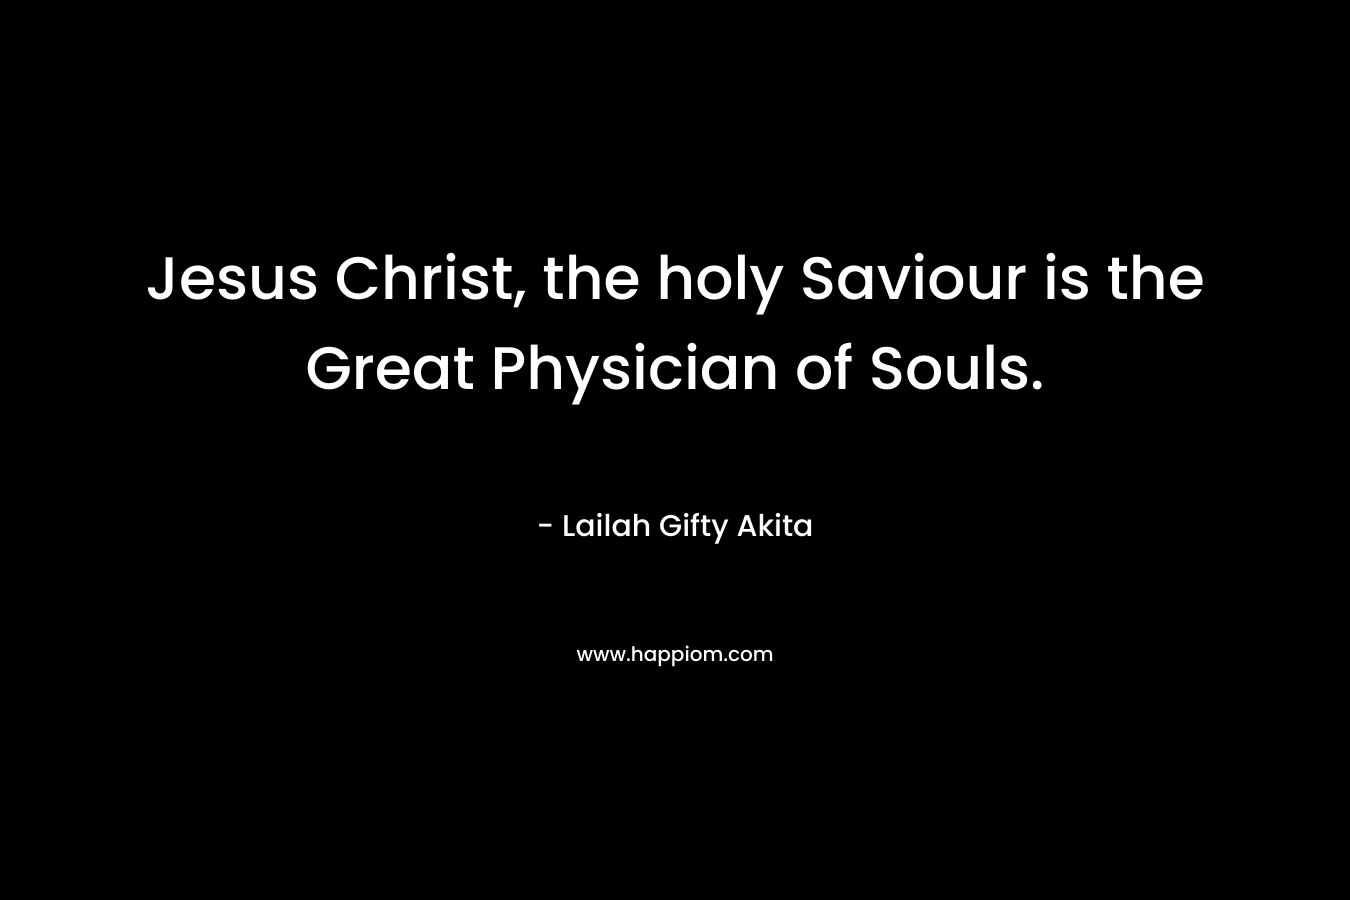 Jesus Christ, the holy Saviour is the Great Physician of Souls.